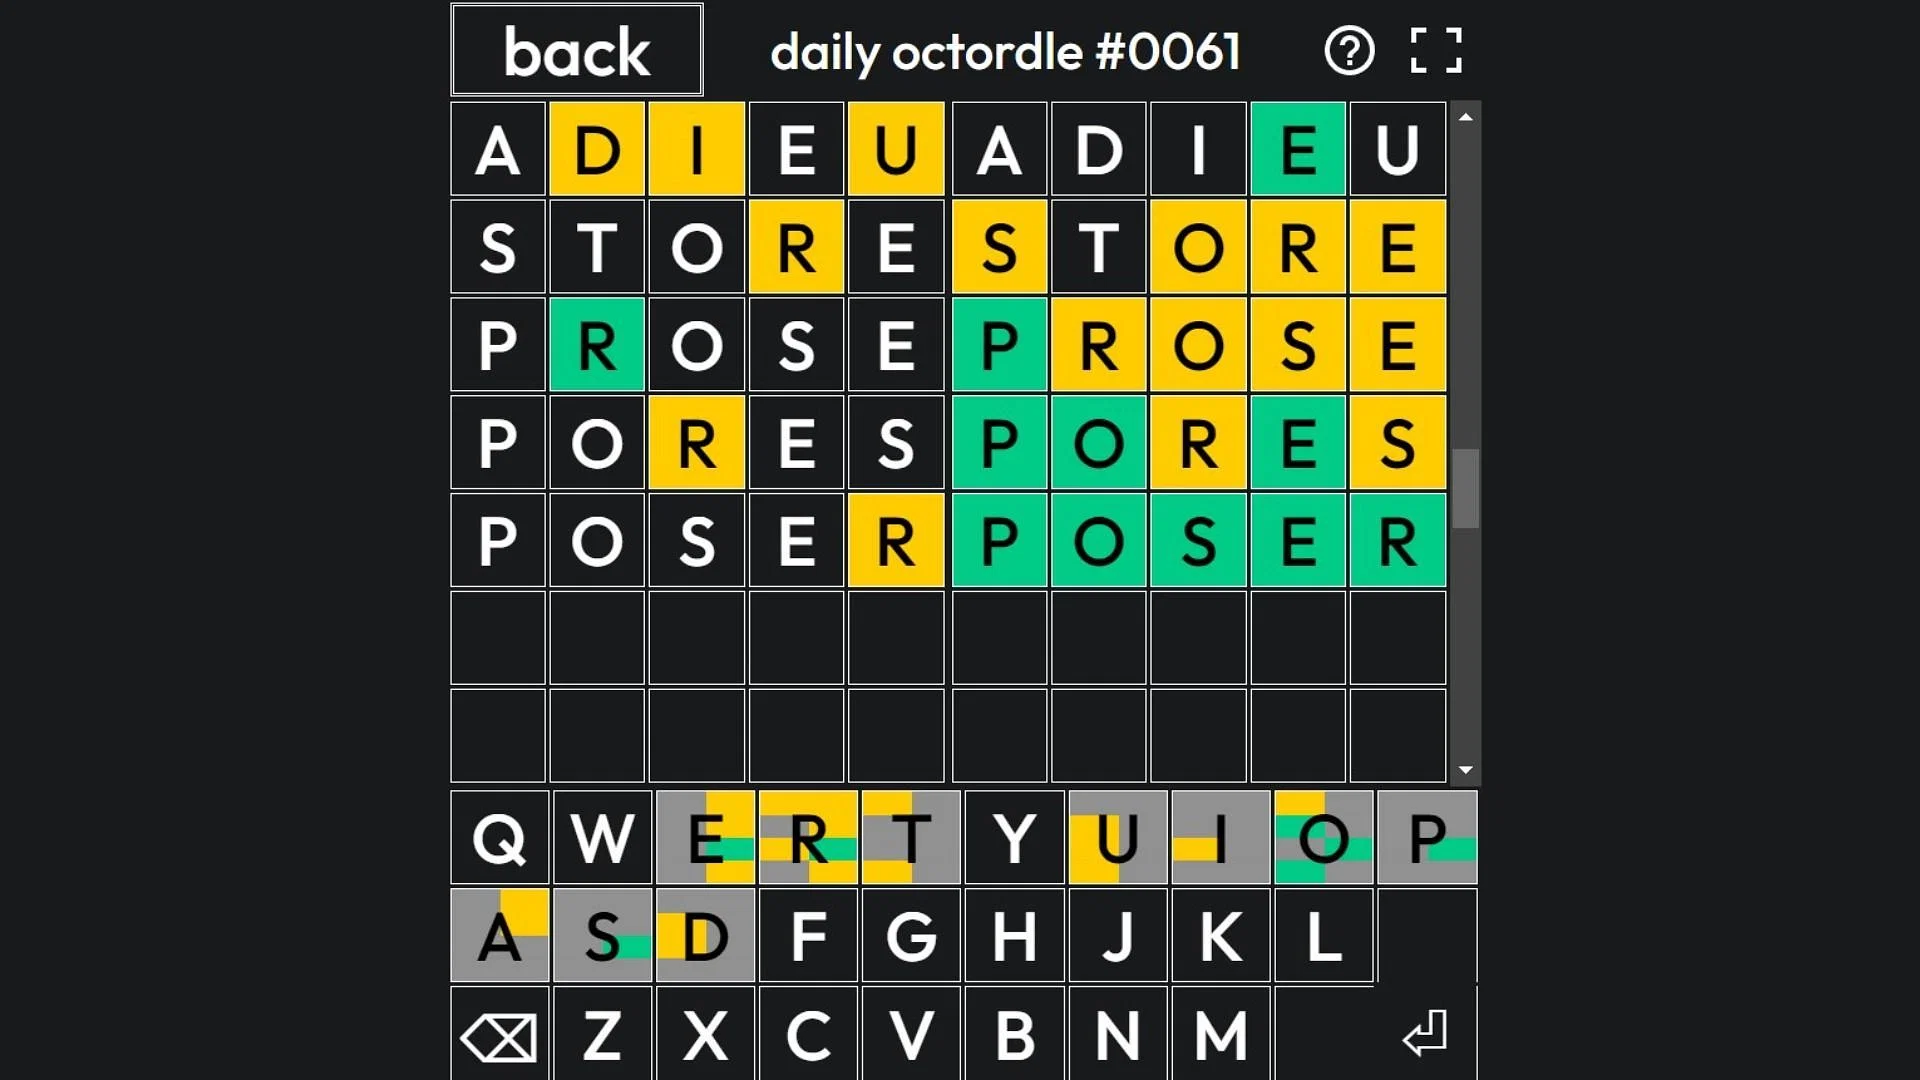 The Ultimate Guide to Octordle: Mastering the Multi-Word Puzzle Game